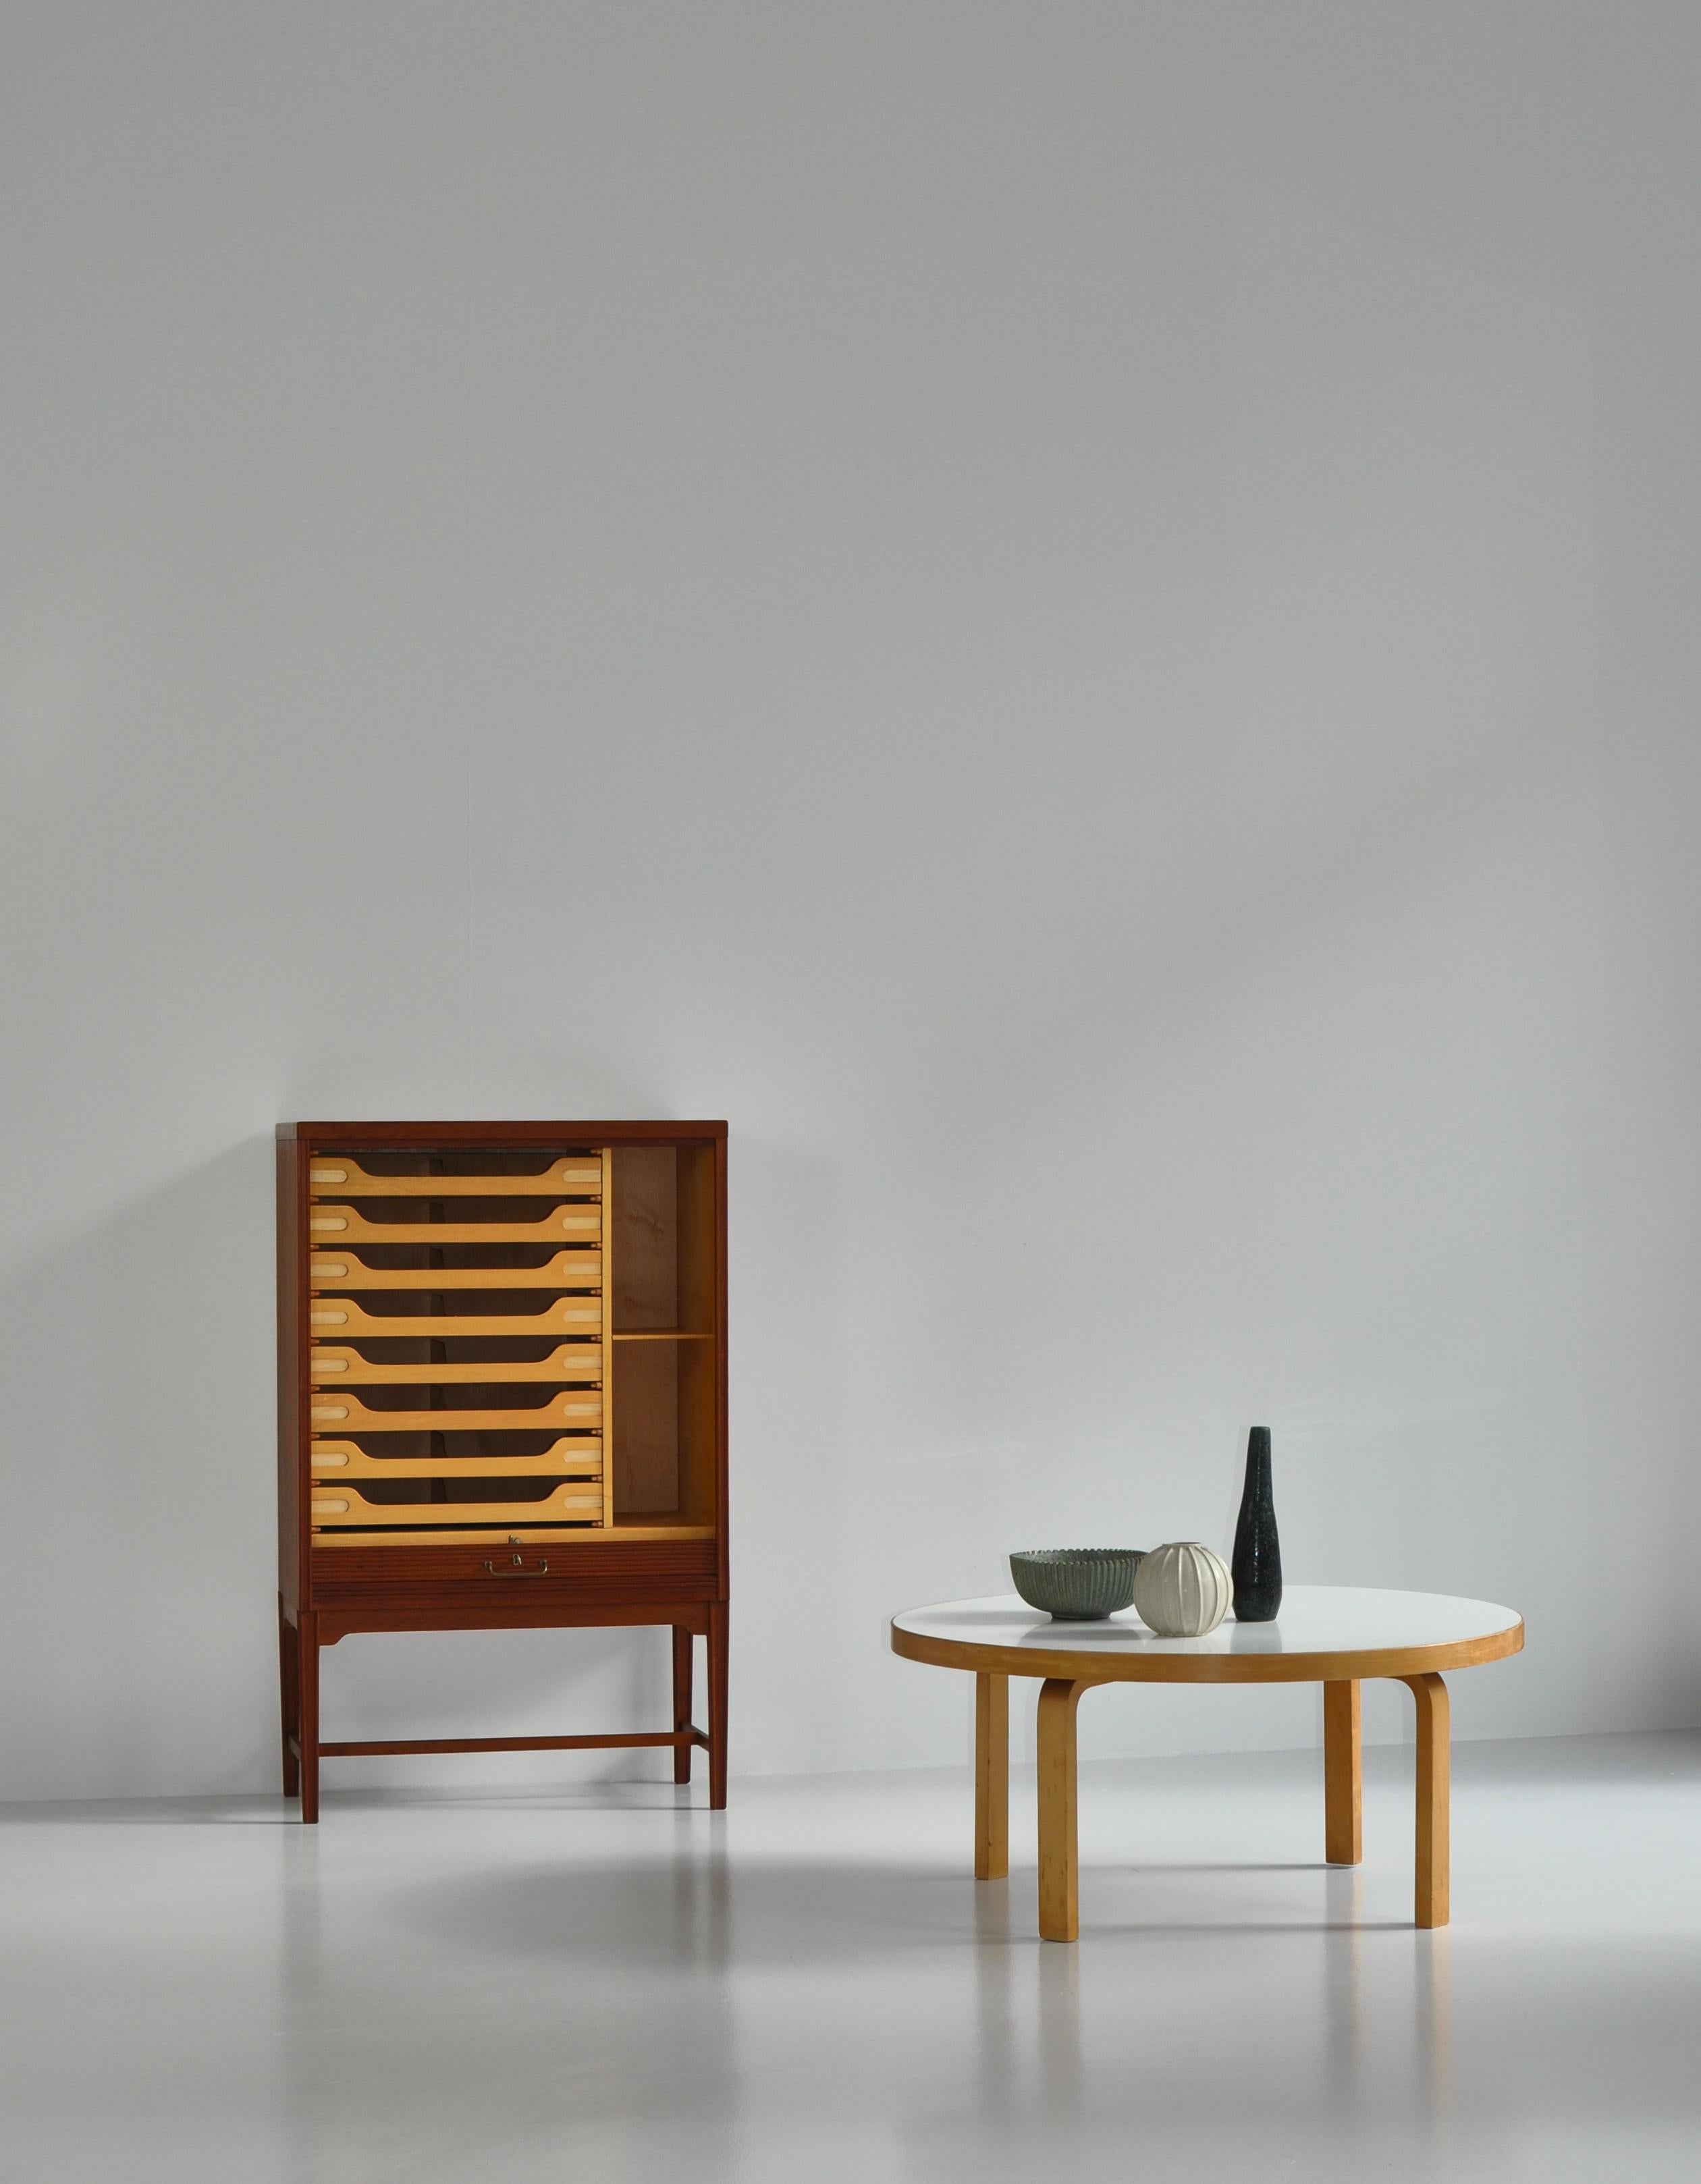 Made in the 1950s by Danish cabinetmaker this beautiful cabinet features smooth front tambour door that roll down into the base and out of sight and eight shallow drawers made of beechwood. In the style of Hvidt & Mølgaard, Jacob Kjaer and other